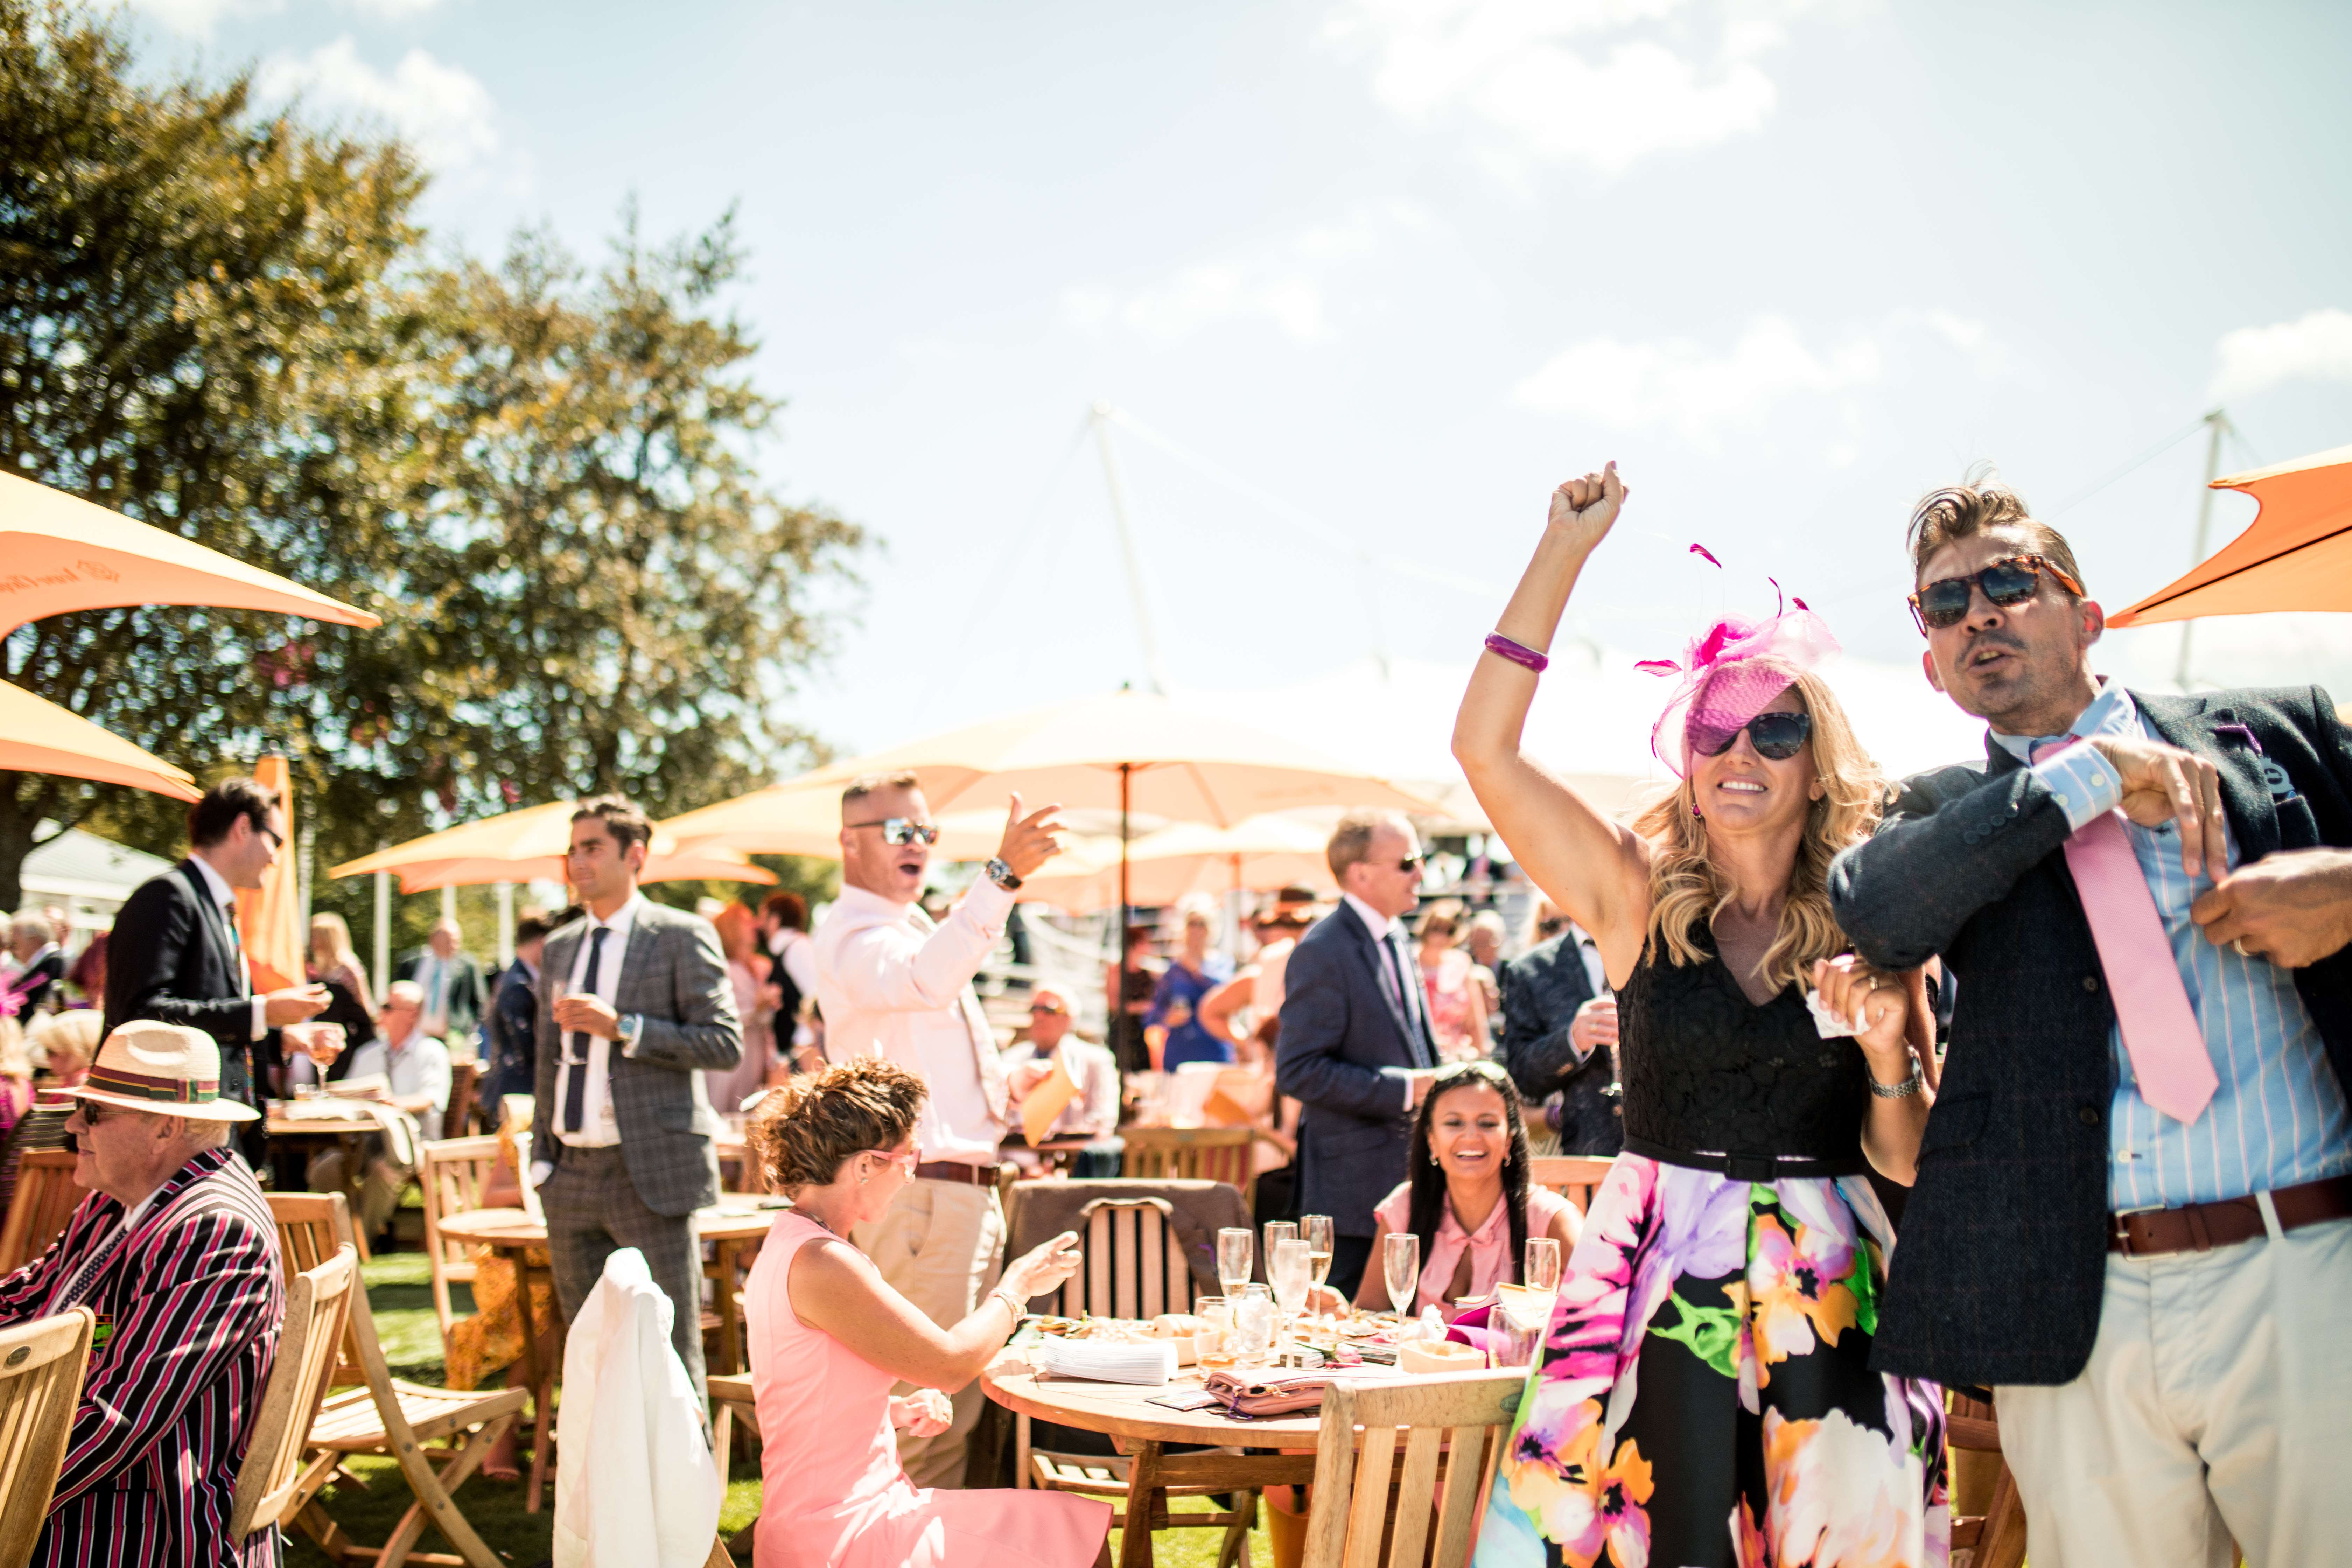 Guests celebrating in the Richmond Enclosure